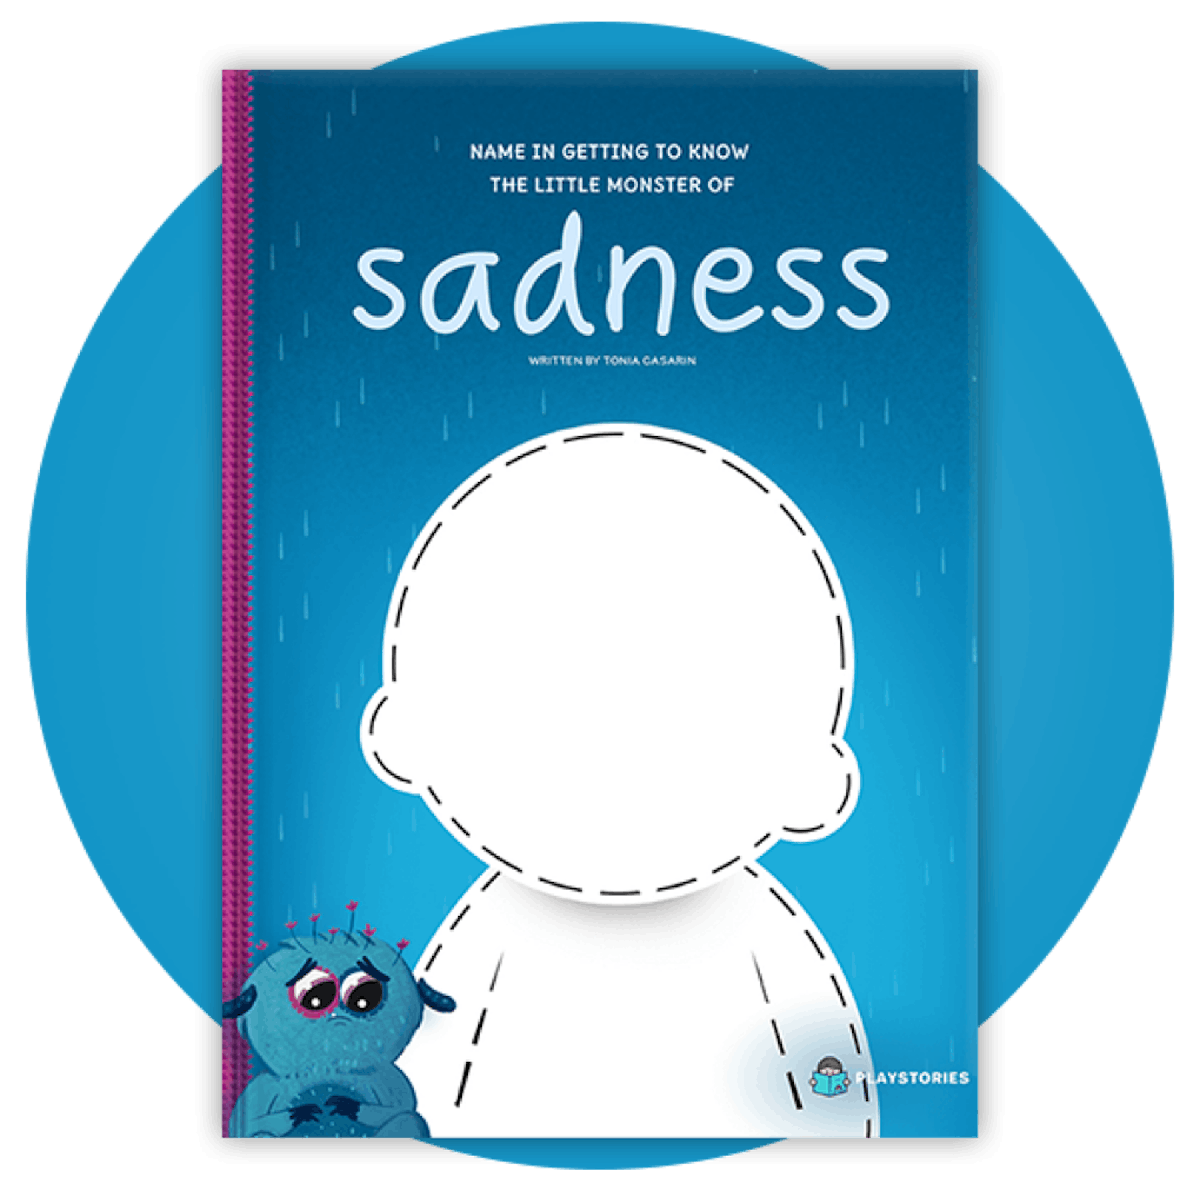 The Little Monster of Sadness